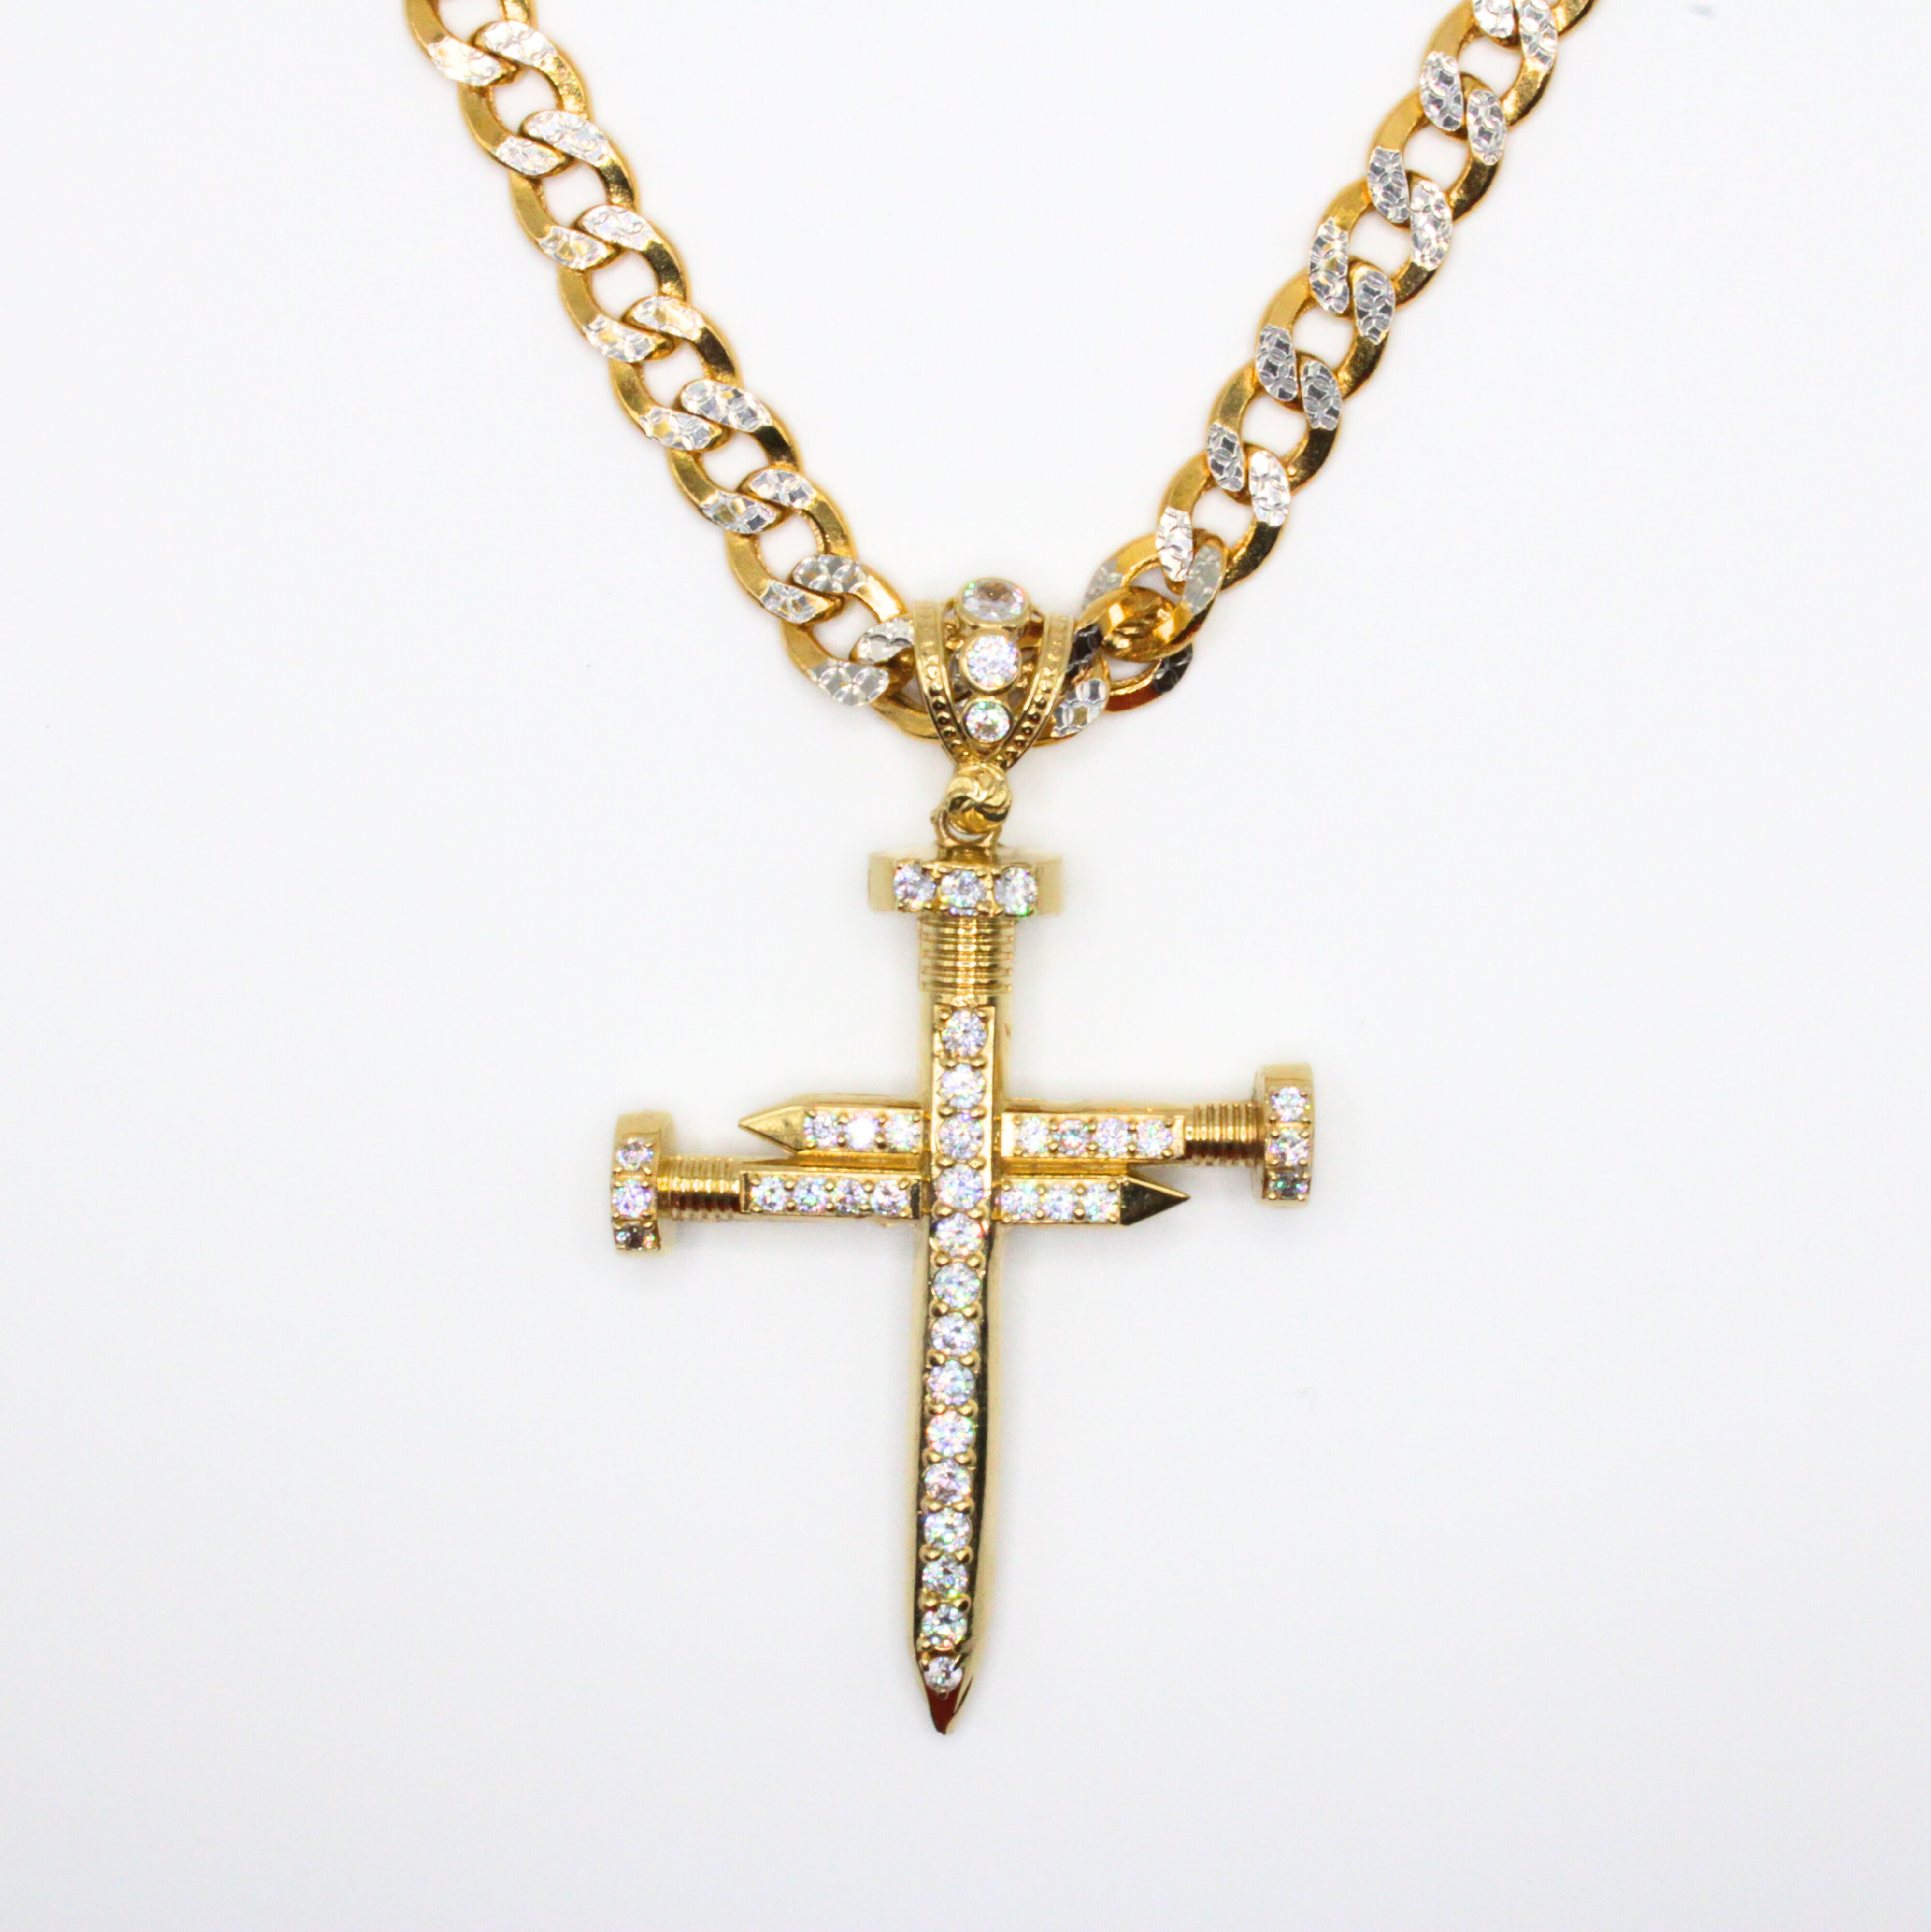 14K Gold Nail Cross Necklace with CZ - Cuban Curb Chain Link